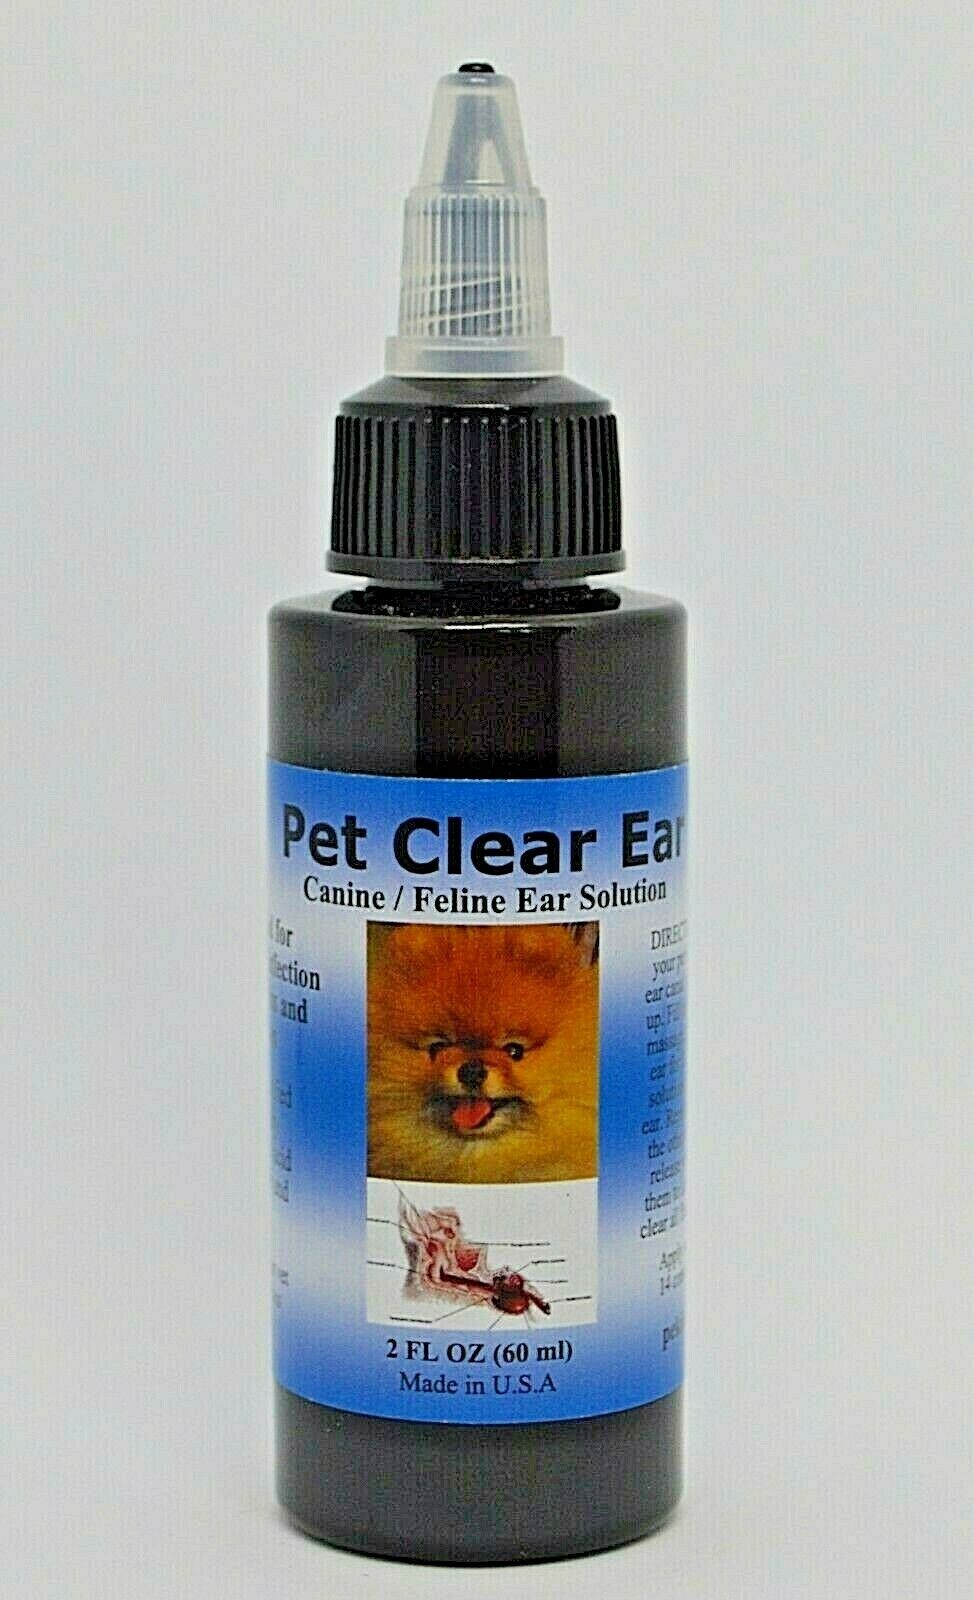 Pet_clear_ear_fungus_yeast_bacteria_infection_cat_dogs_medicine_ringworm